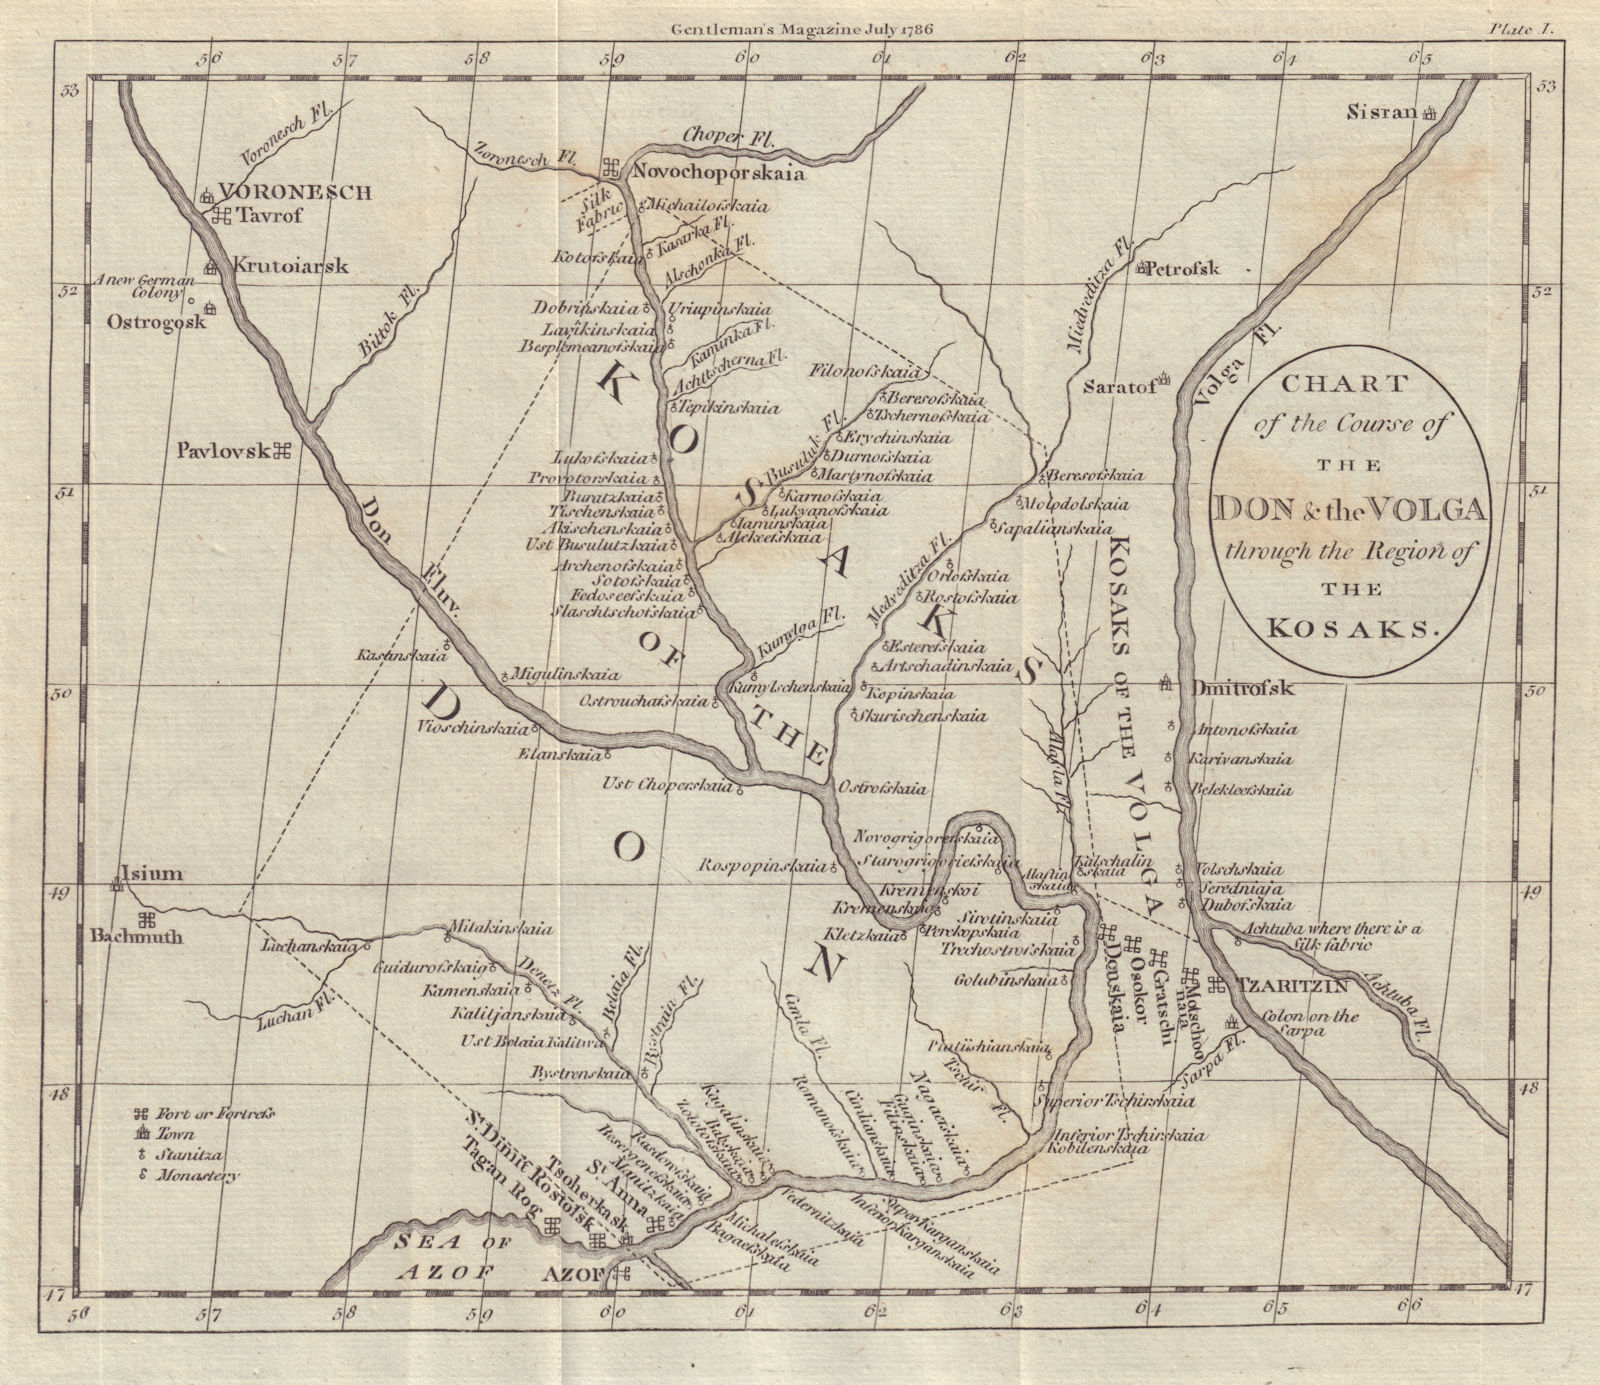 Associate Product Course of the Don & Volga through the Region of the Kosaks. GENTS MAG 1786 map